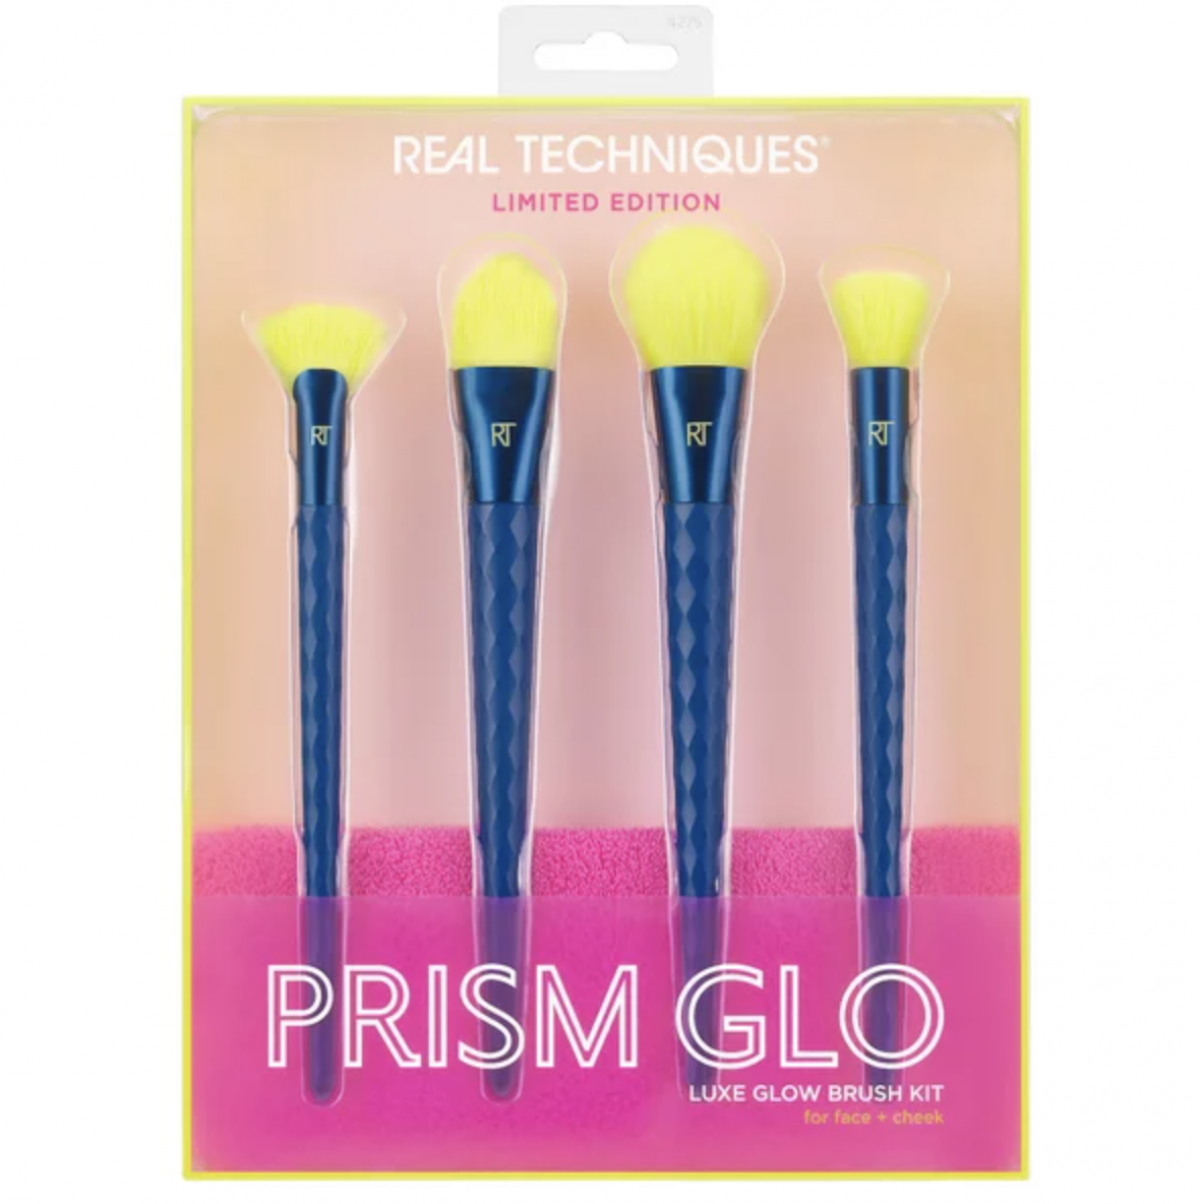 Prism Go Luxe Glow Brush Kit - Real Techniques